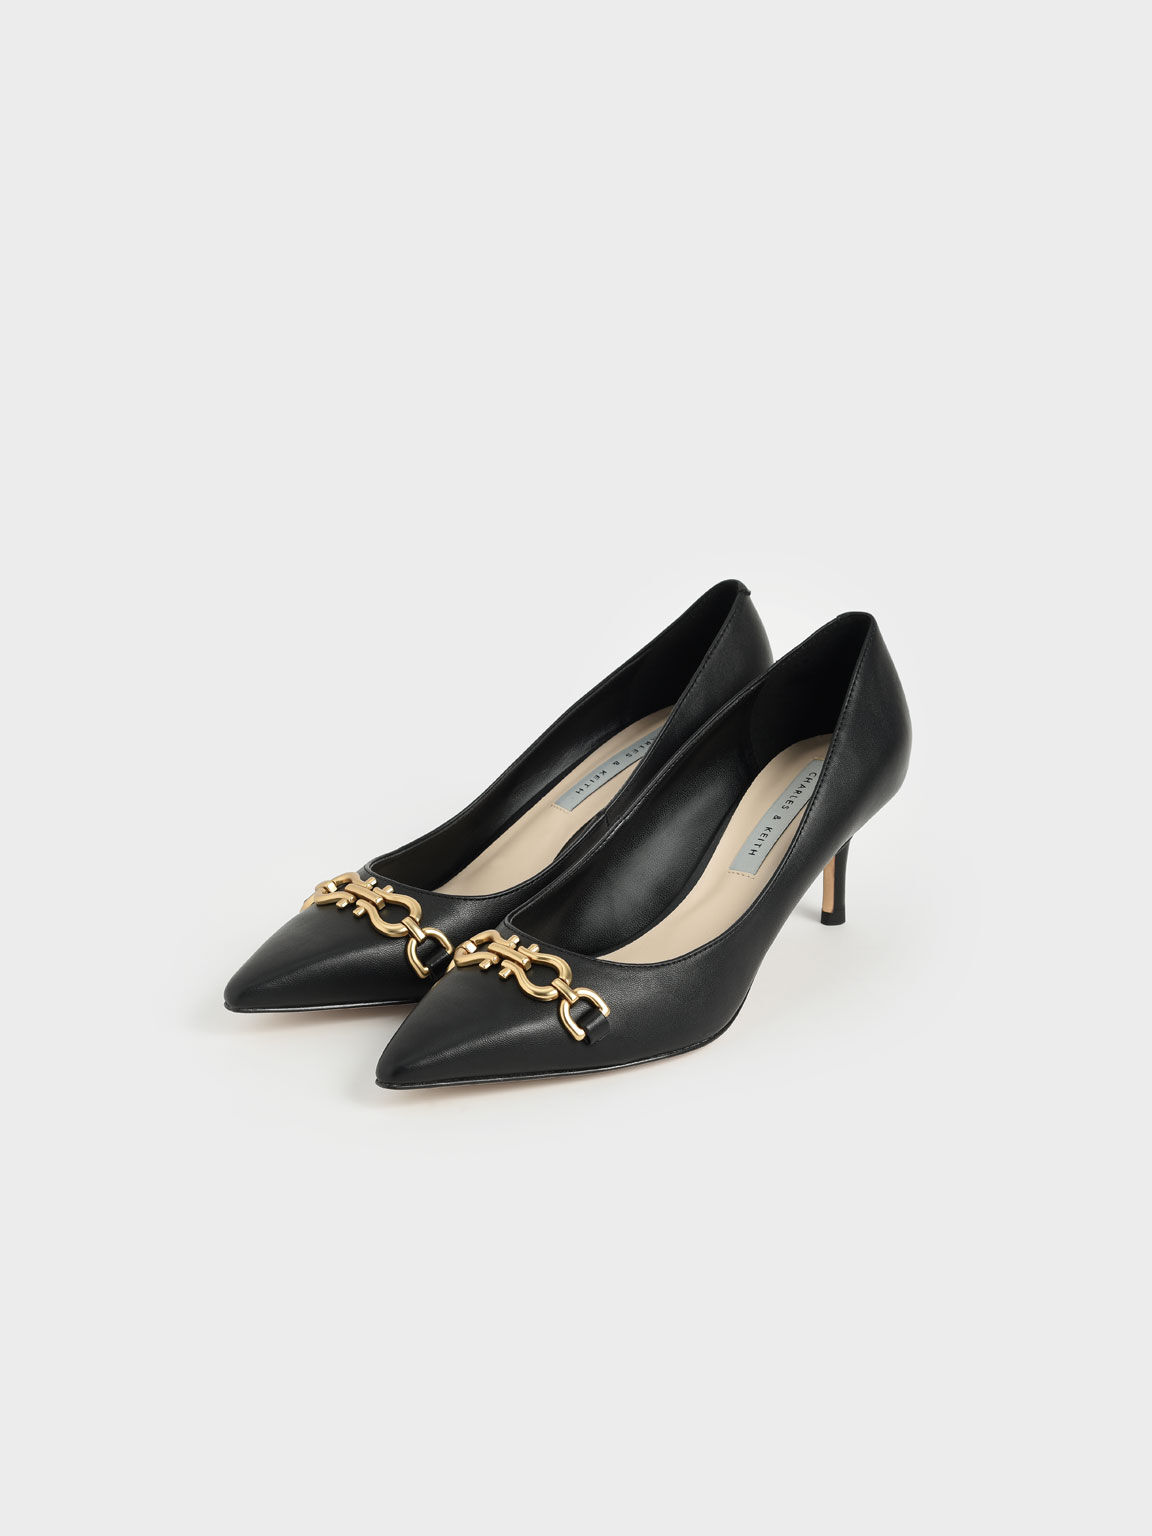 Chain Link Pointed Toe Pumps, Black, hi-res